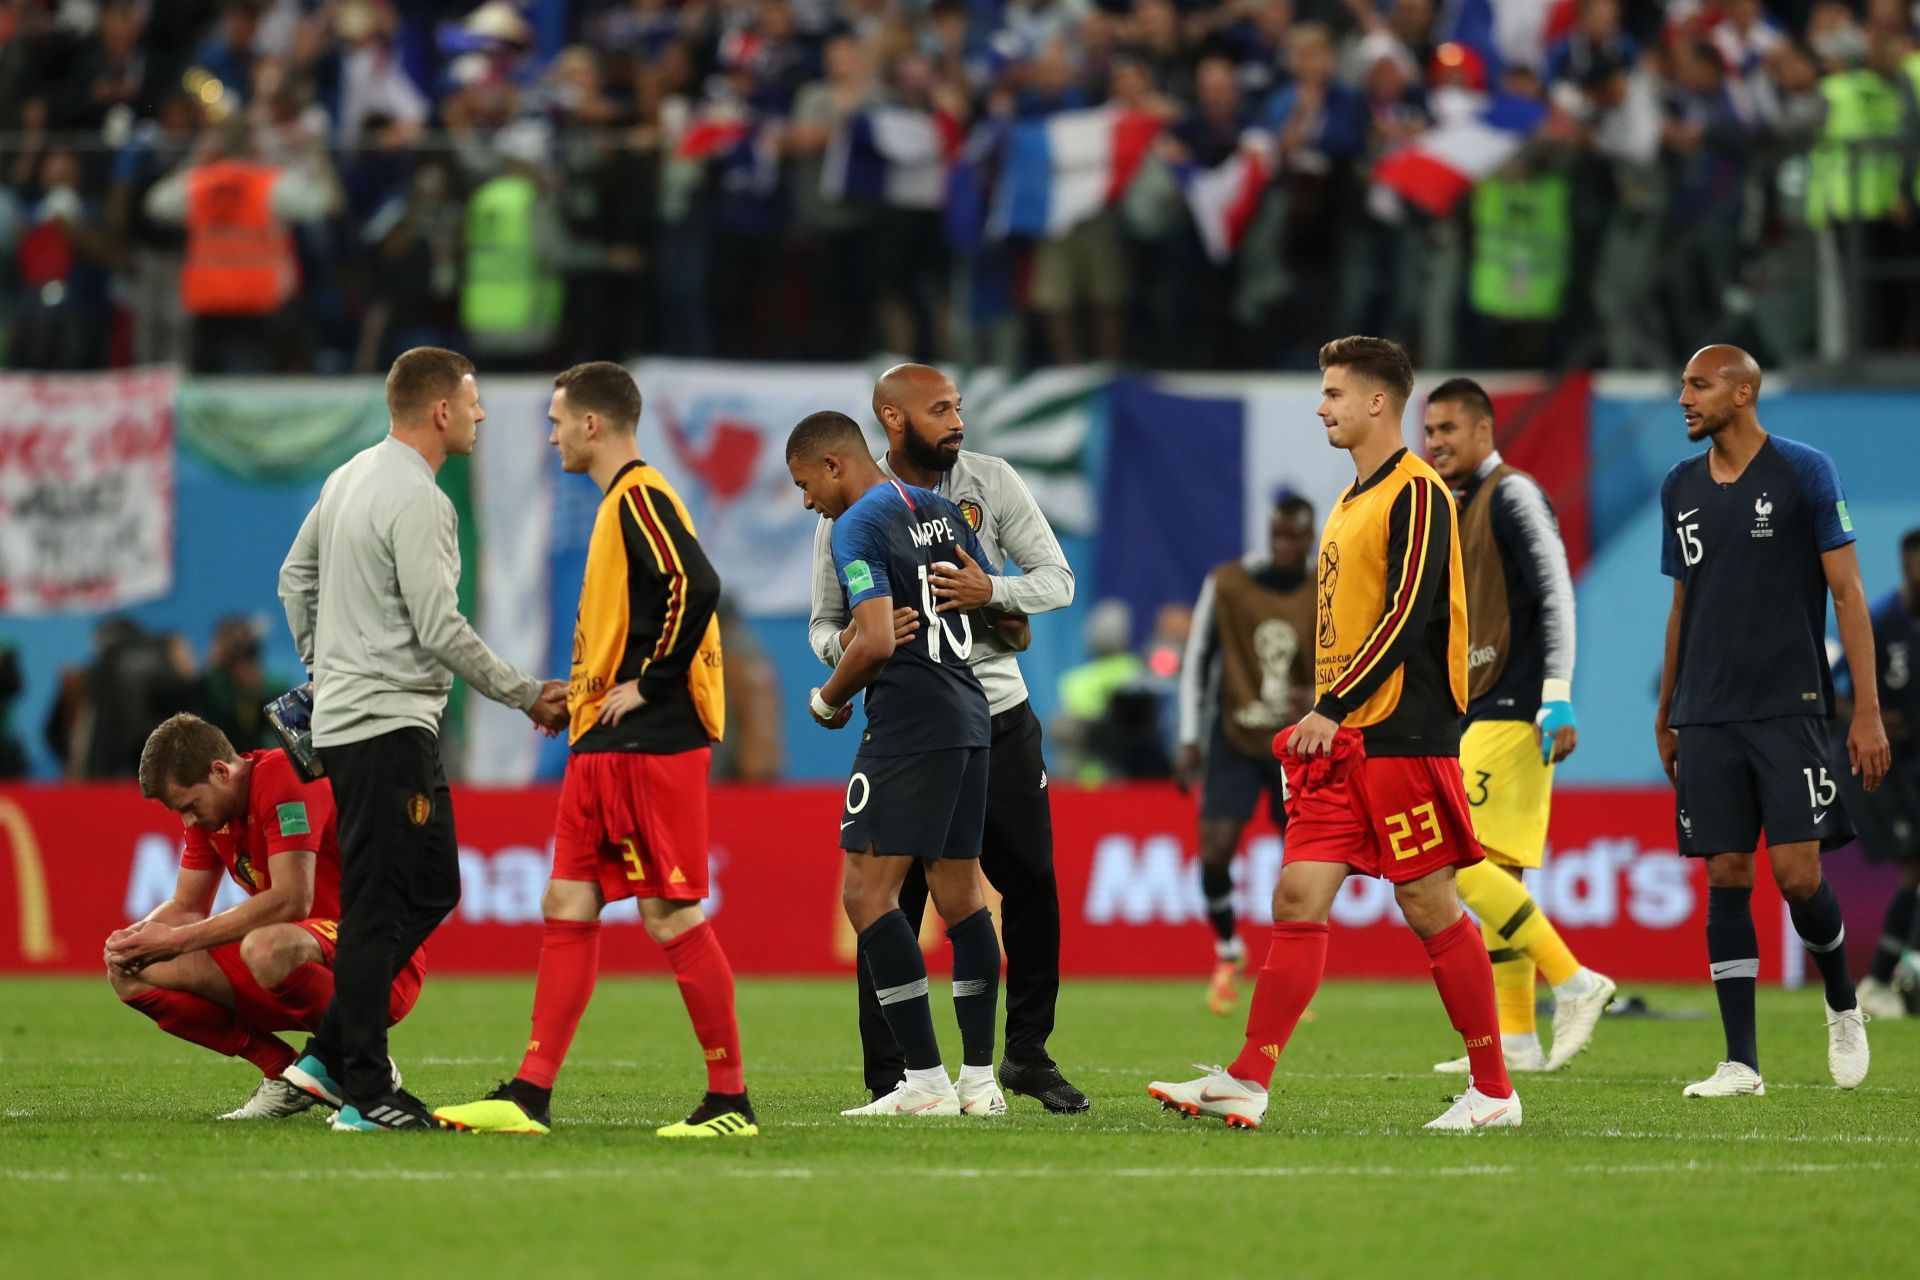 Thierry Henry and Kylian Mbappe (via Getty Images)